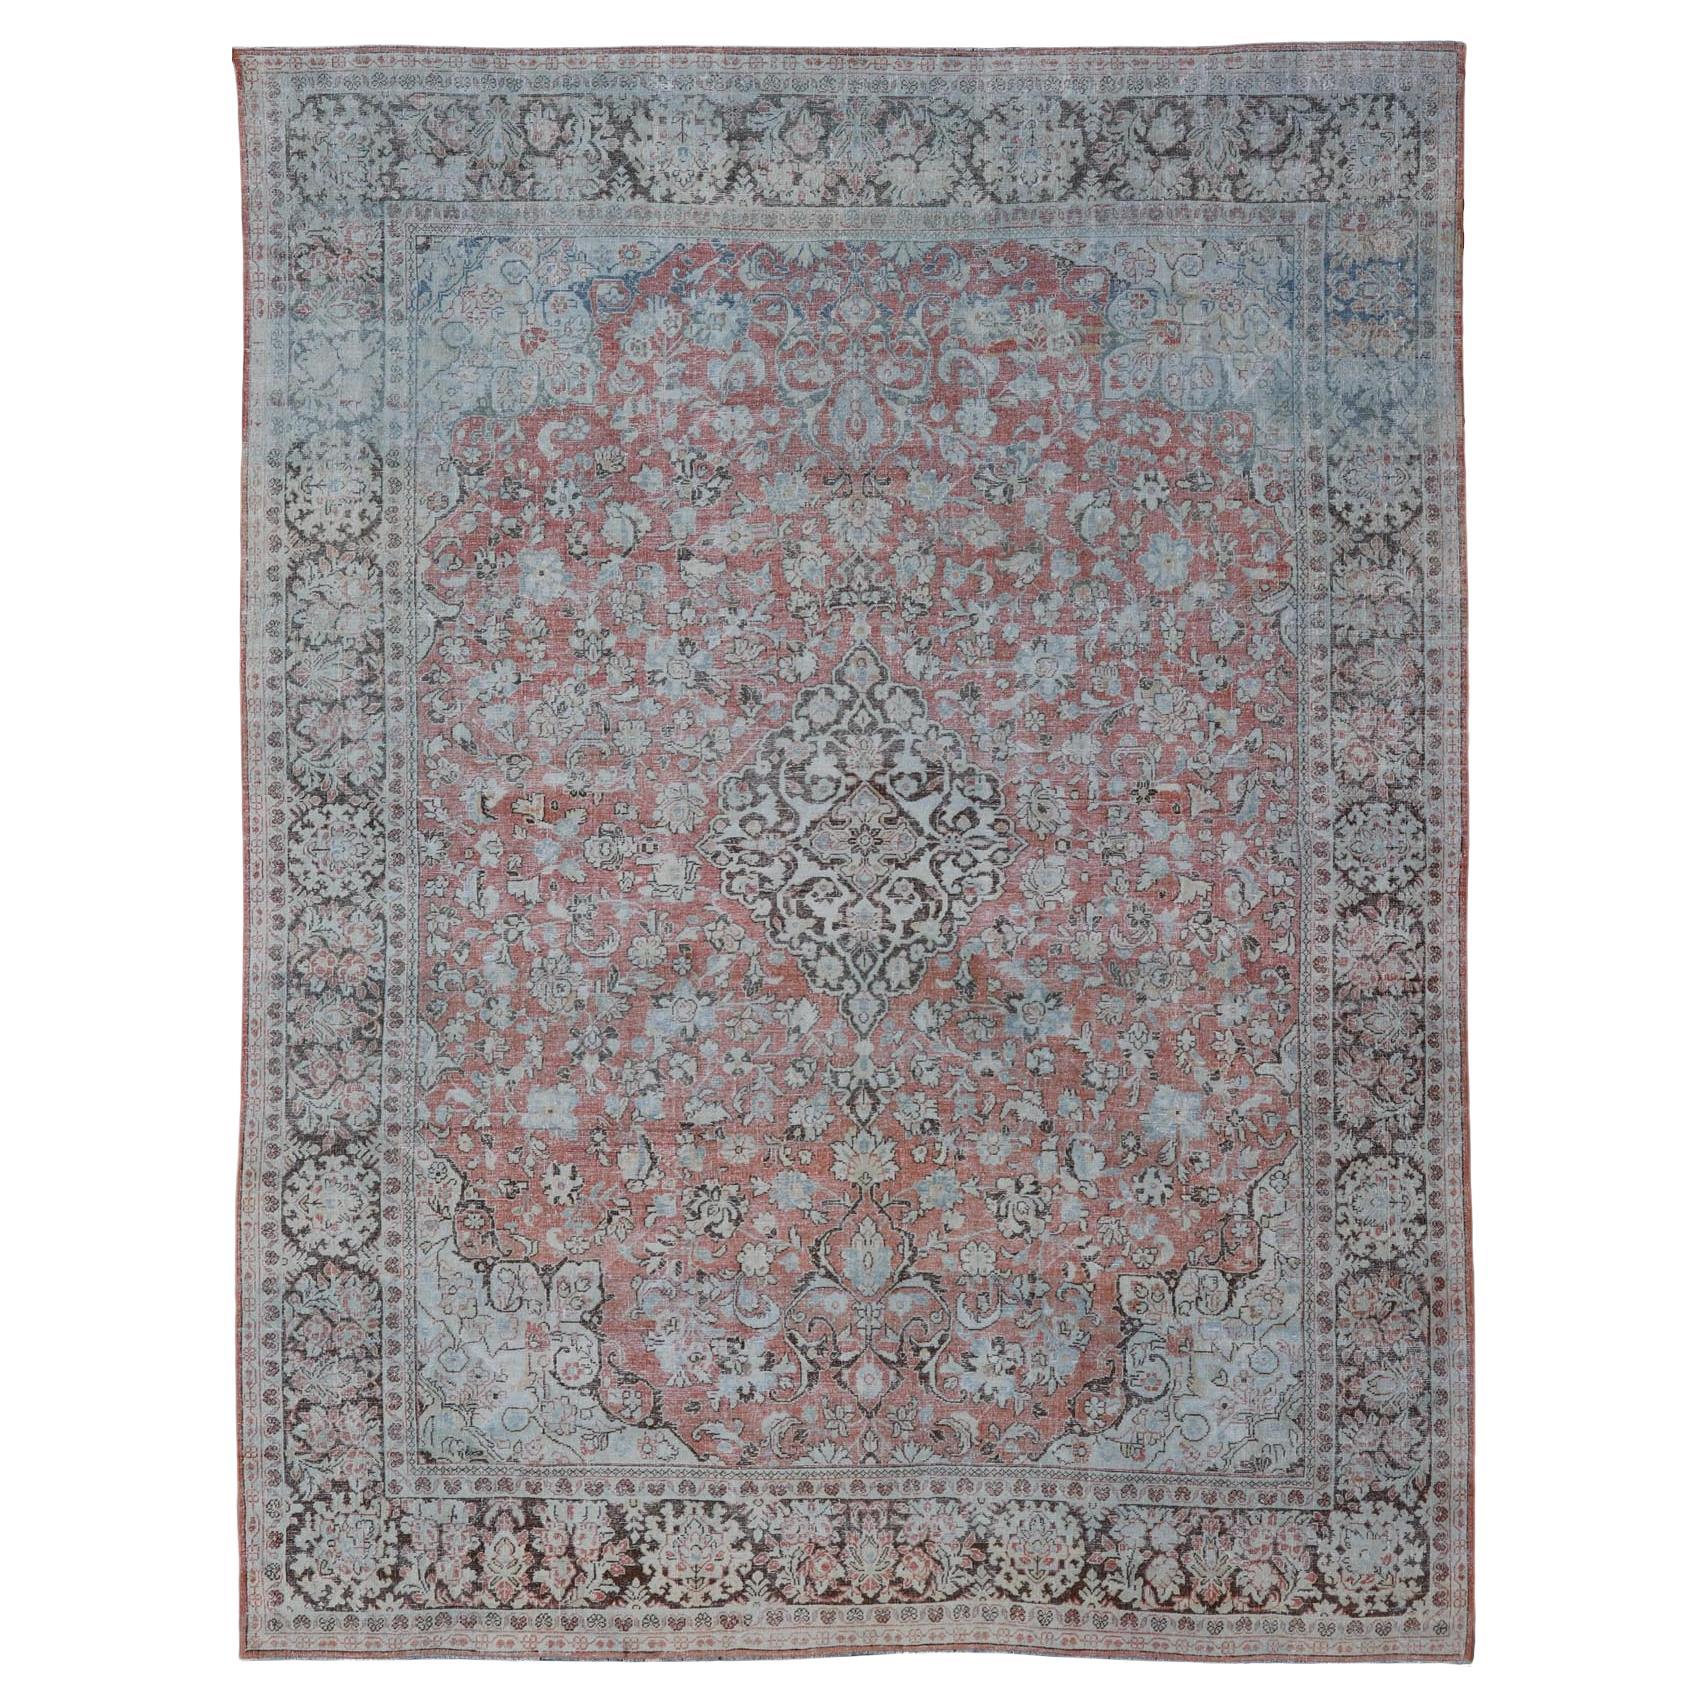 Distressed Antique Medallion Persian Mahal Rug in Faded Orange, Cream and Brown